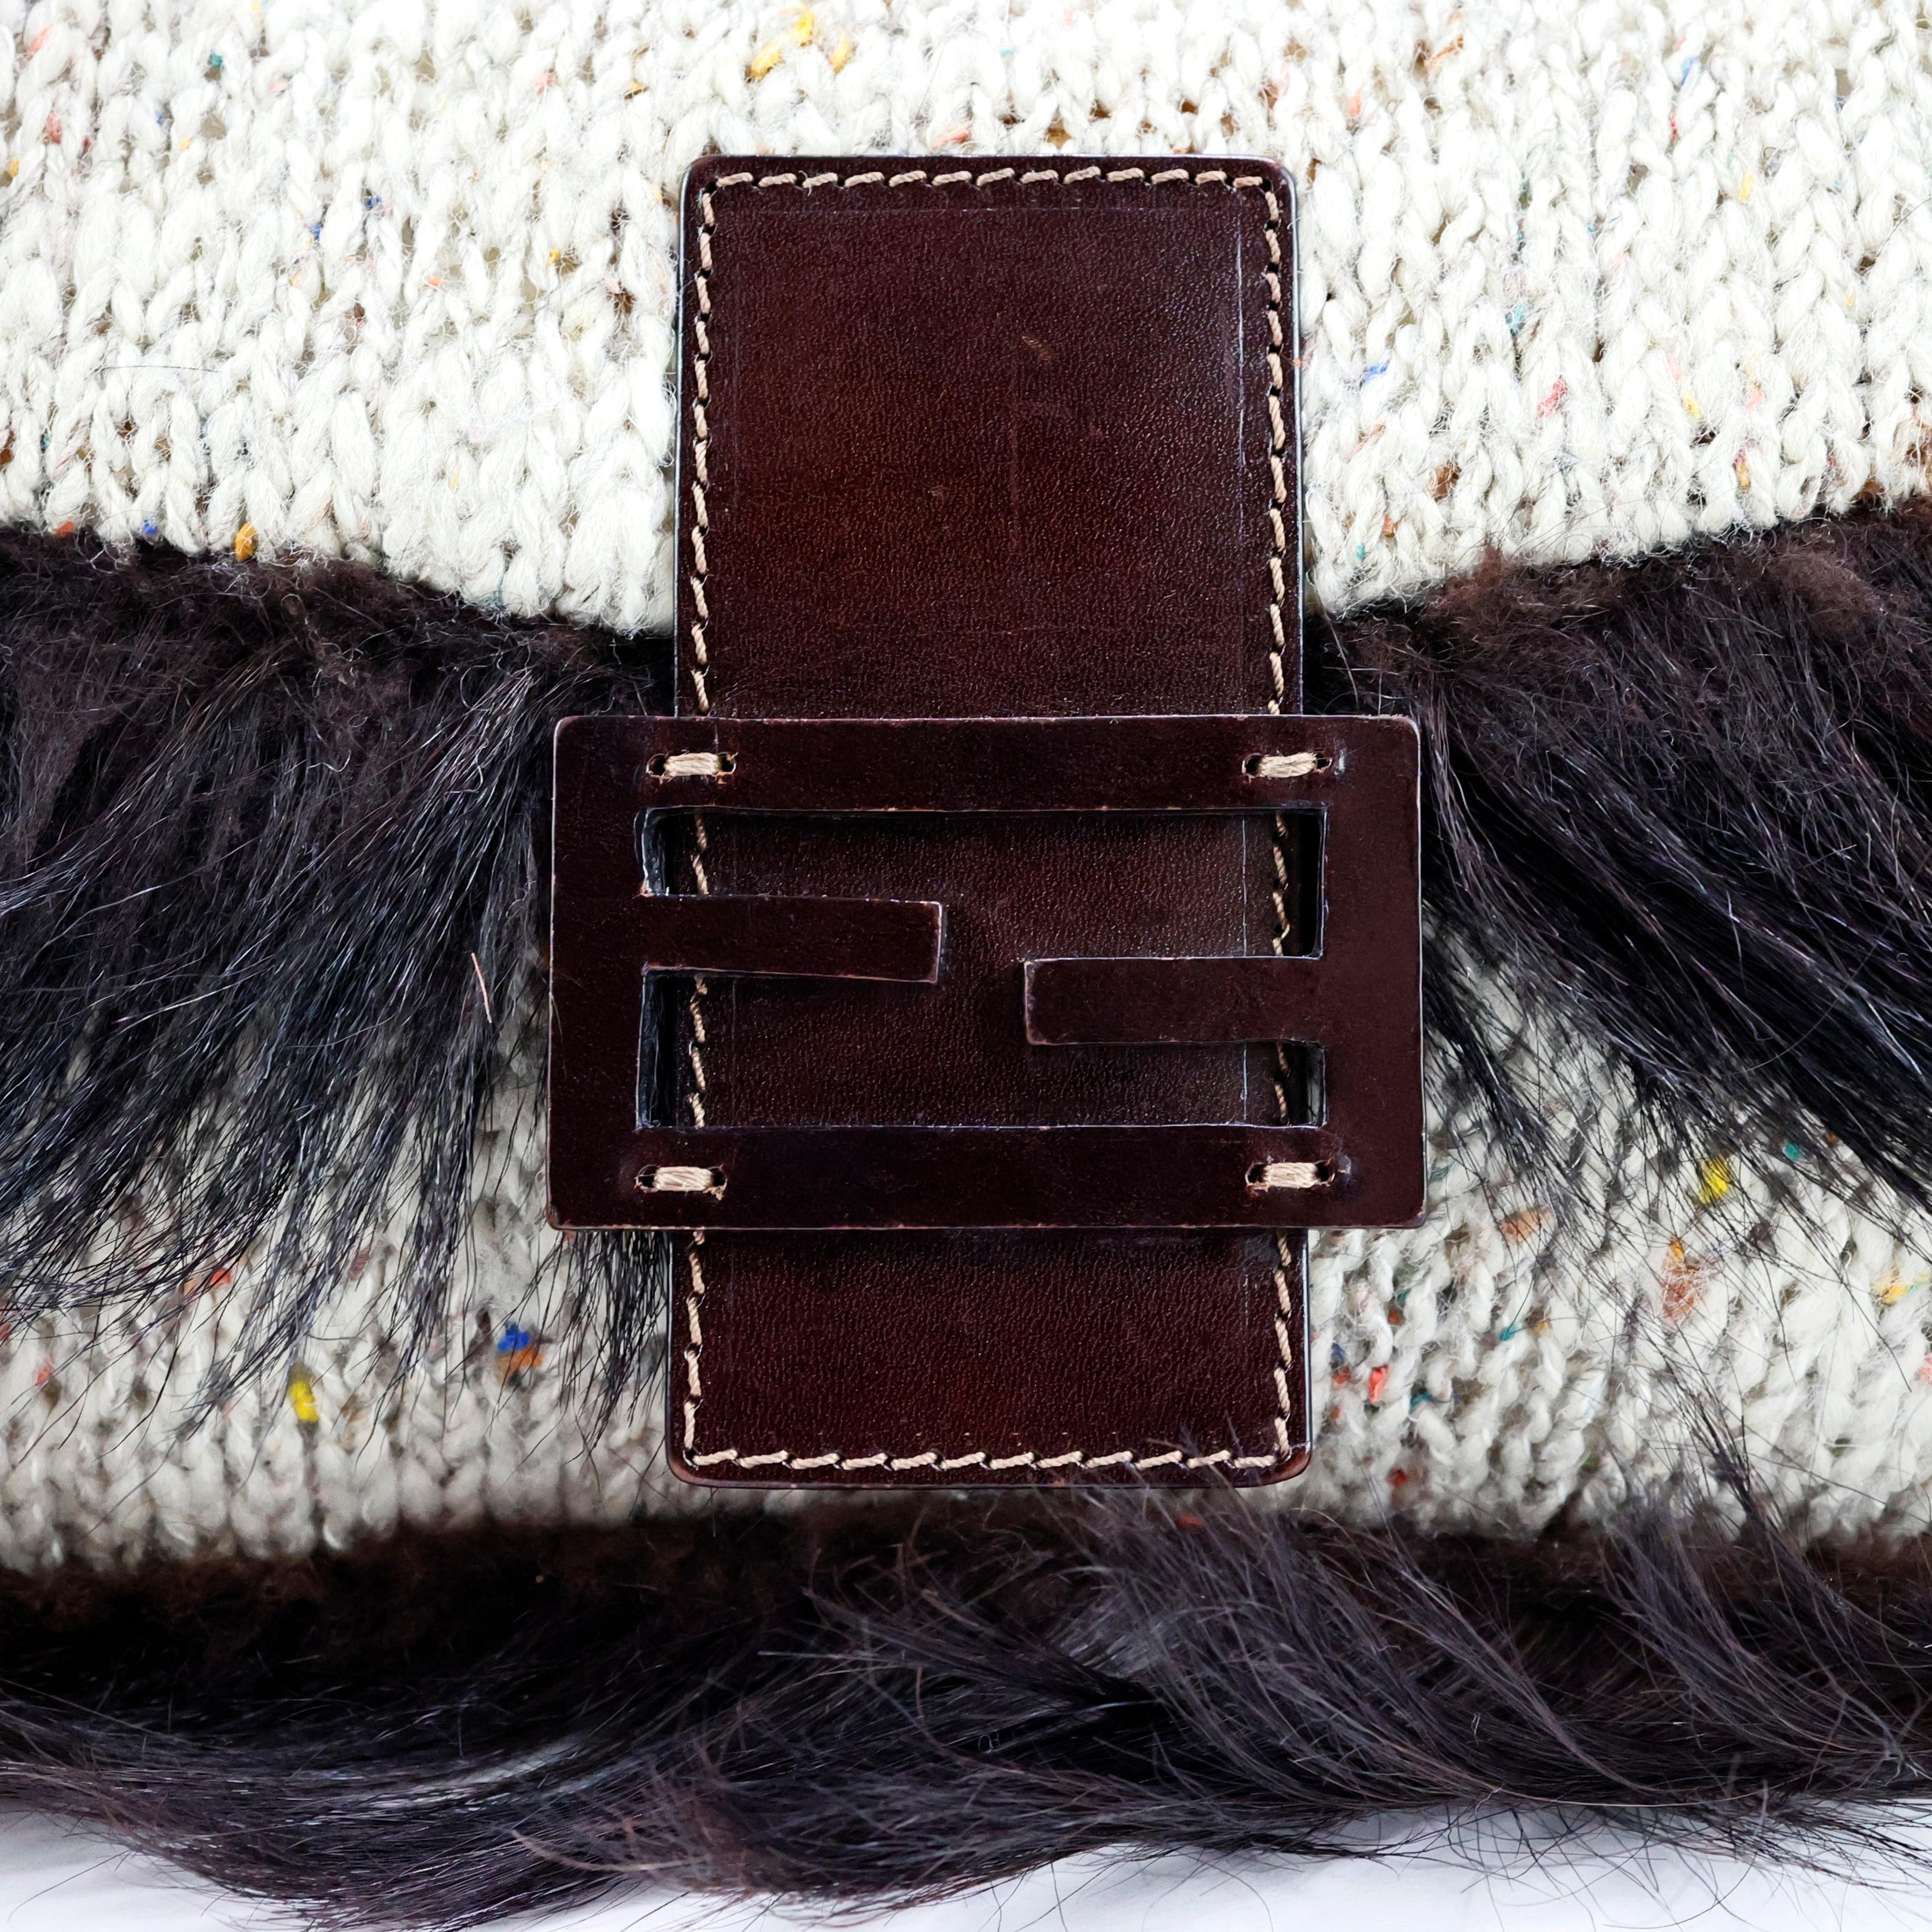 Fendi Knitted Baguette with Fur In Good Condition For Sale In Bressanone, IT